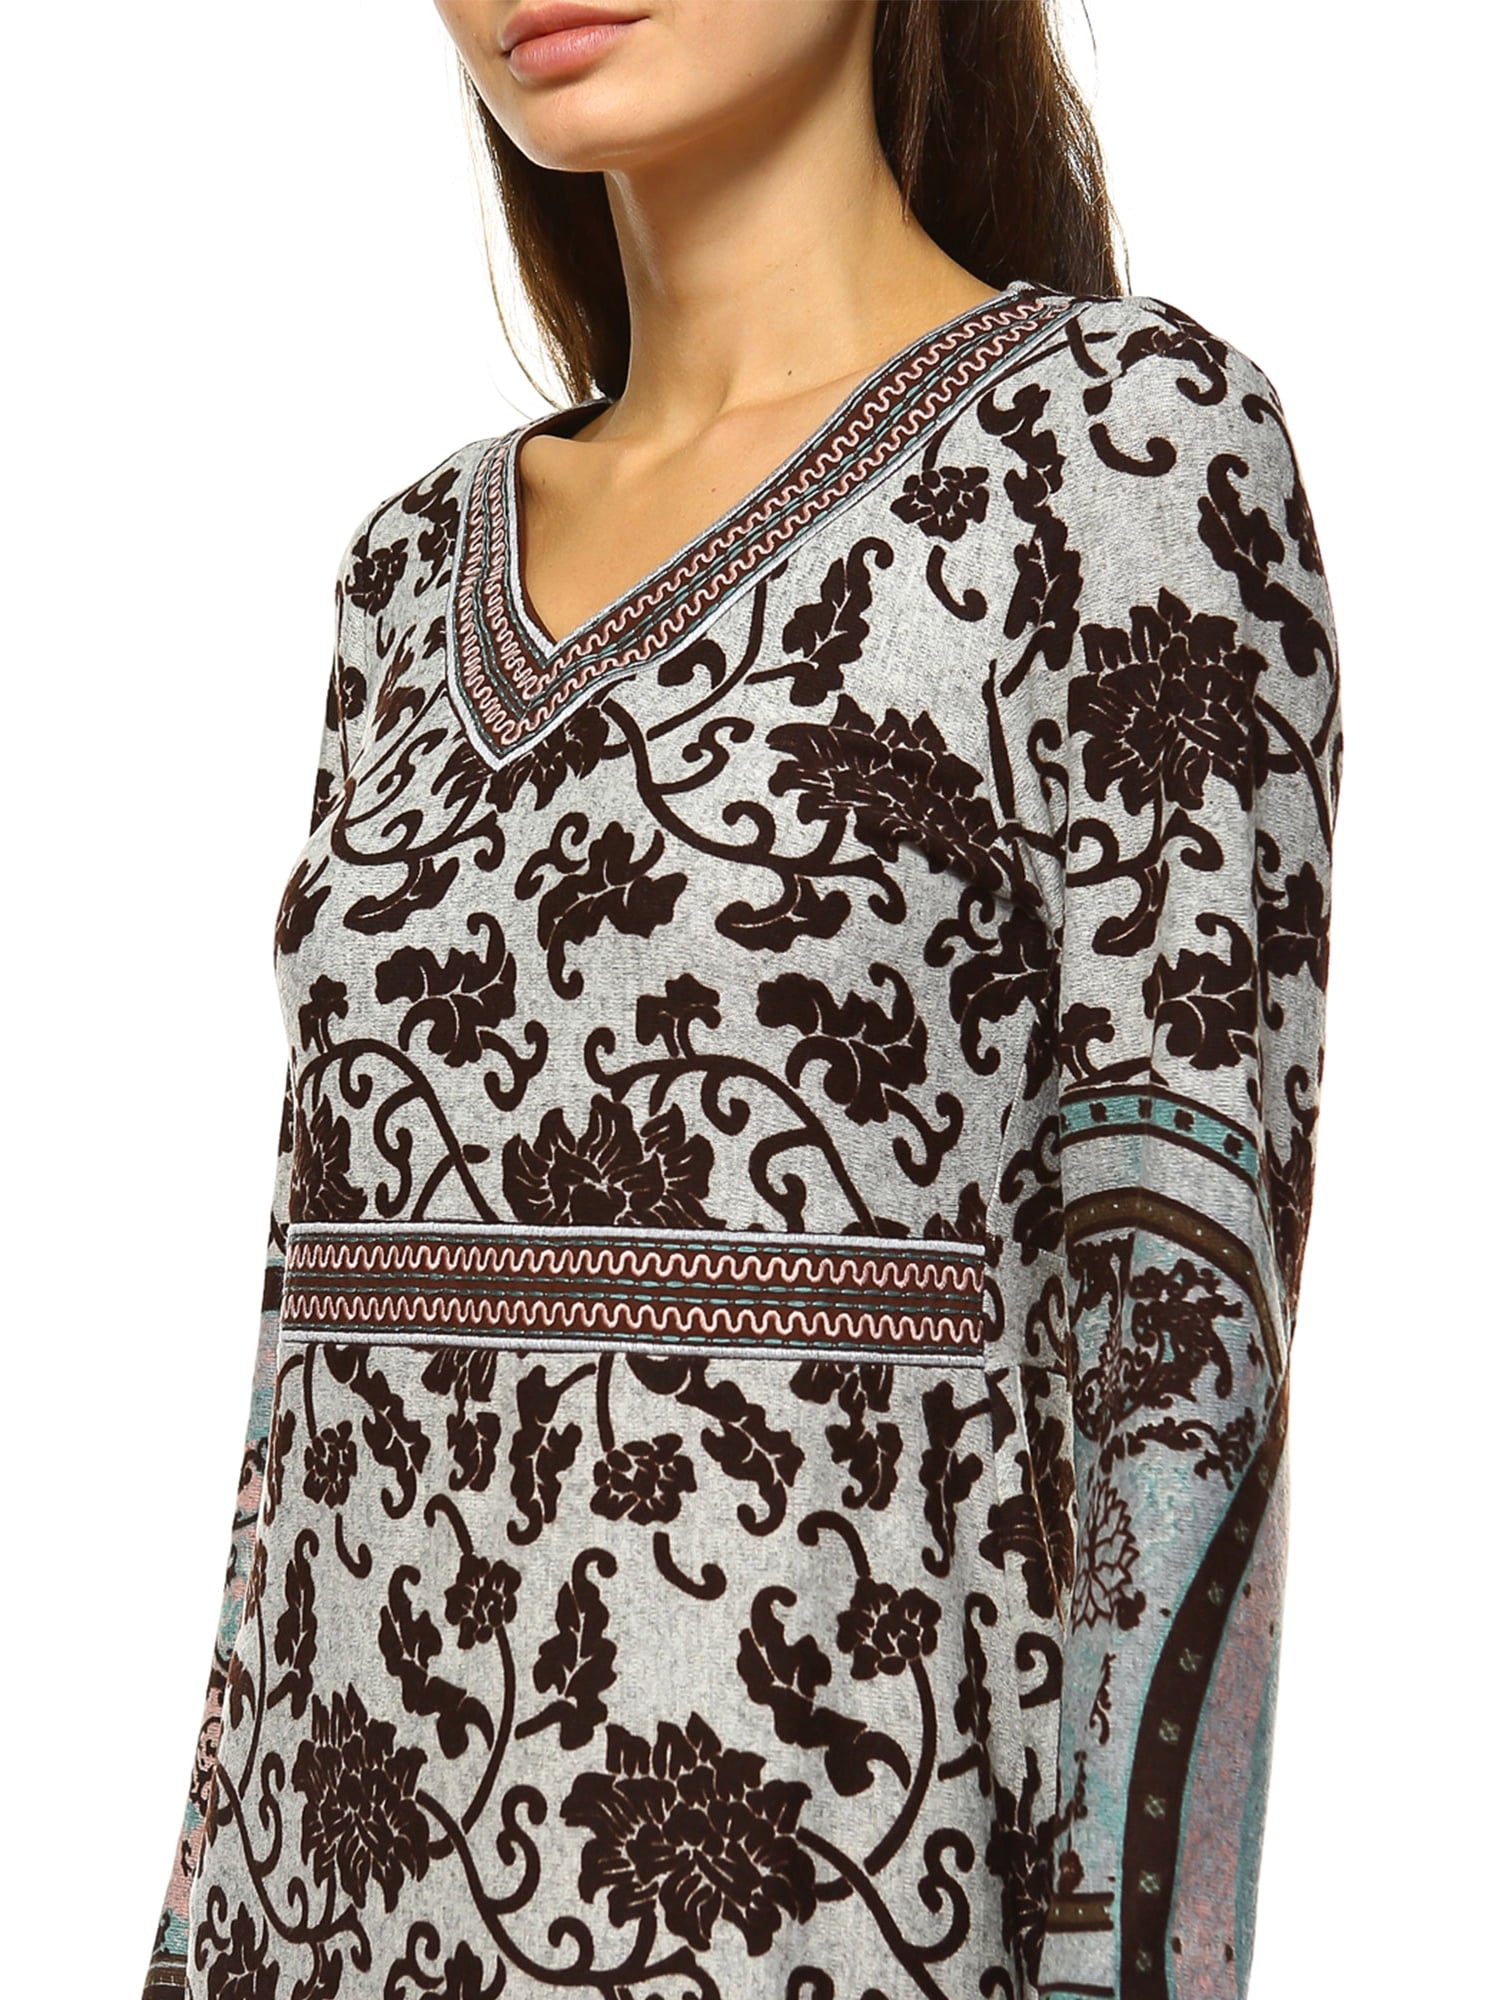 Women's Naarah Embroidered Sweater Dress - image 4 of 4